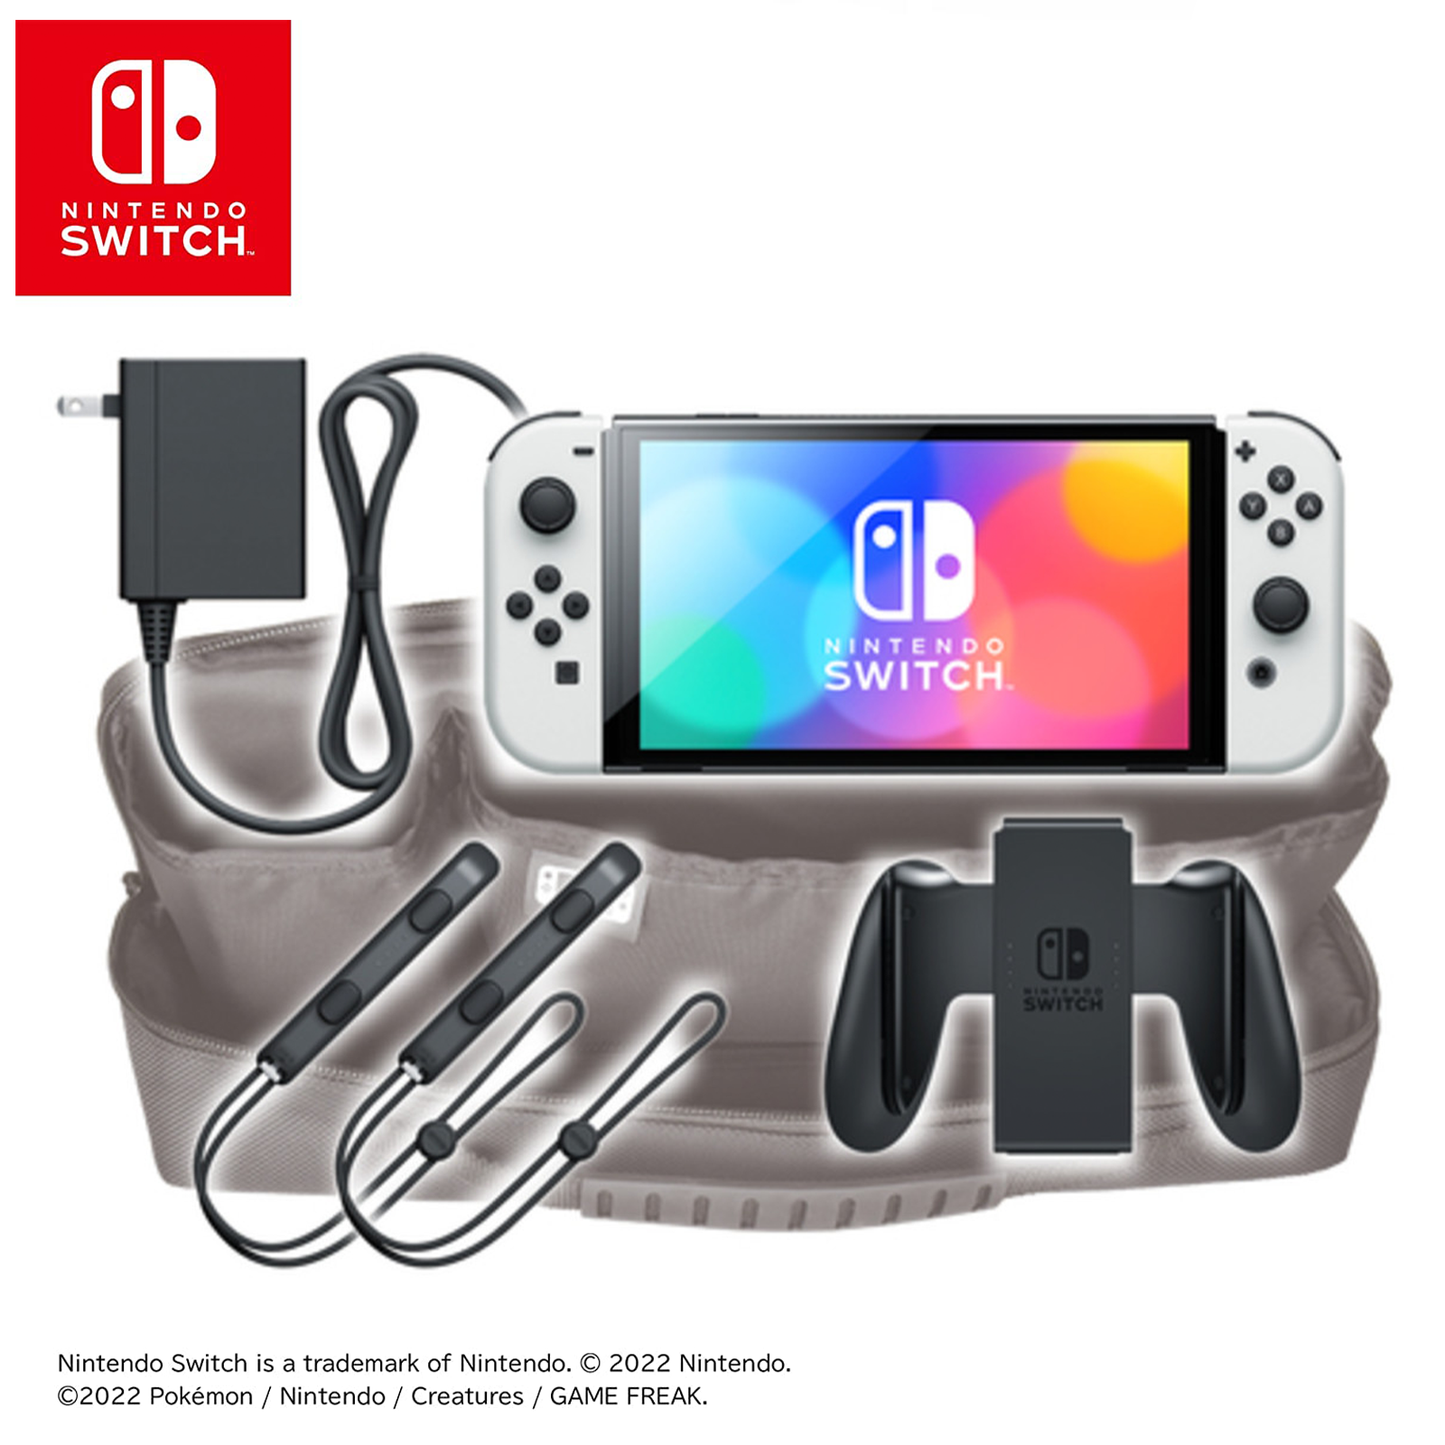 Cargo Pouch For Nintendo Switch gadgets and accessories for the pouch